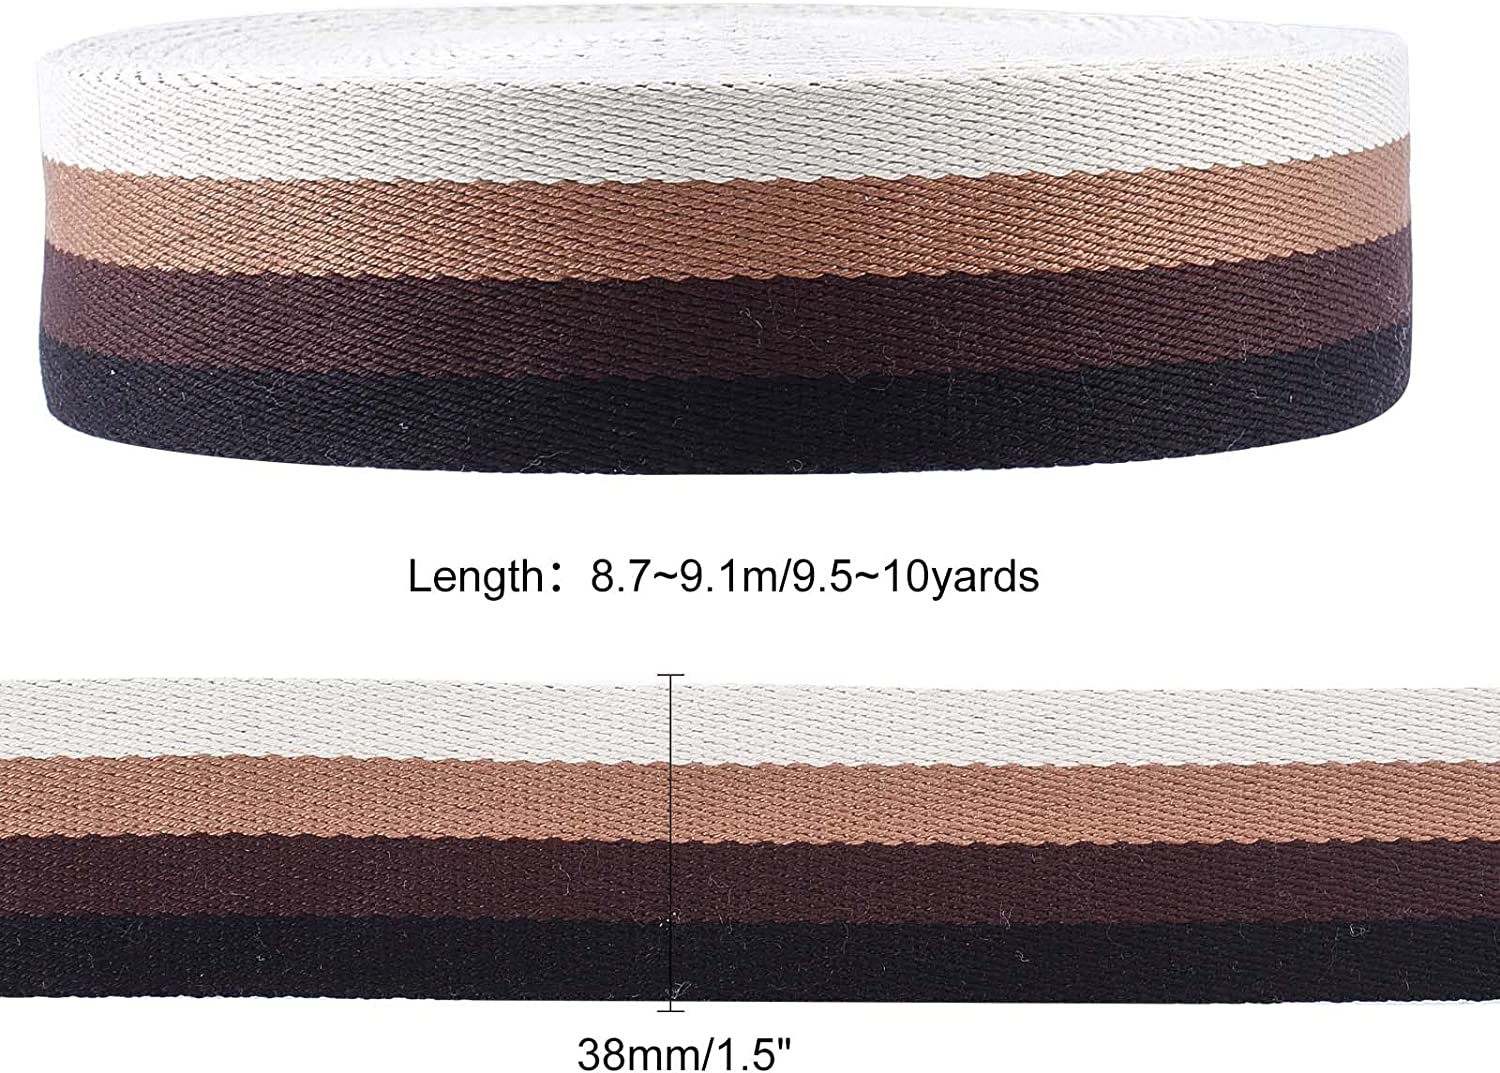 About 9m Canvas Band Cotton Ribbon Flat with Stripe Pattern Band Coconut Brown Garment Accessories for Crossbody Handbag Straps Replacement